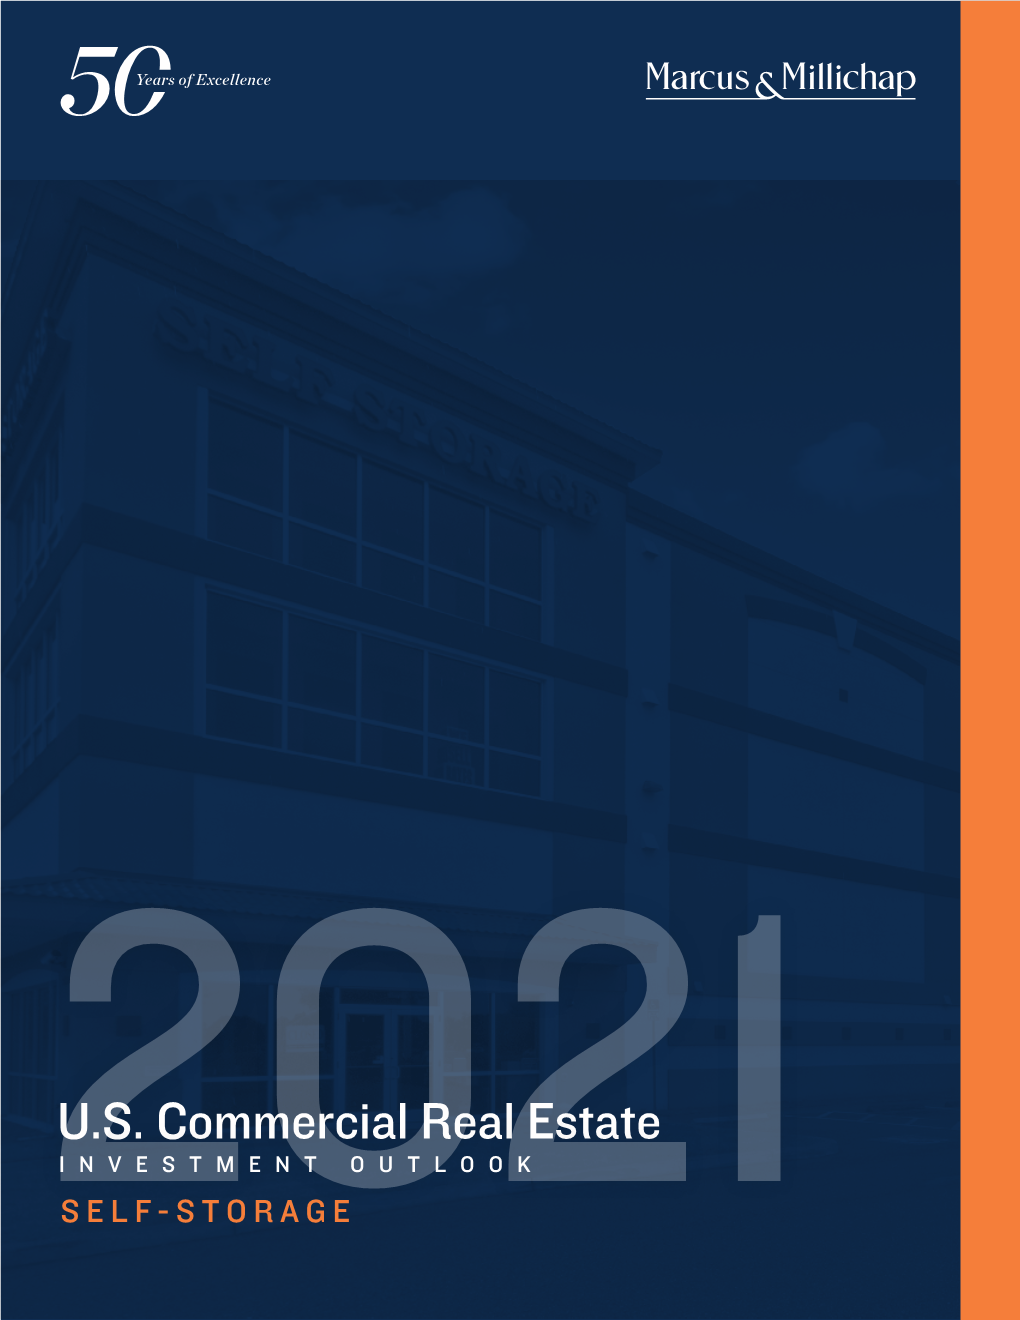 2021 U.S. Self-Storage Investment Outlook Report